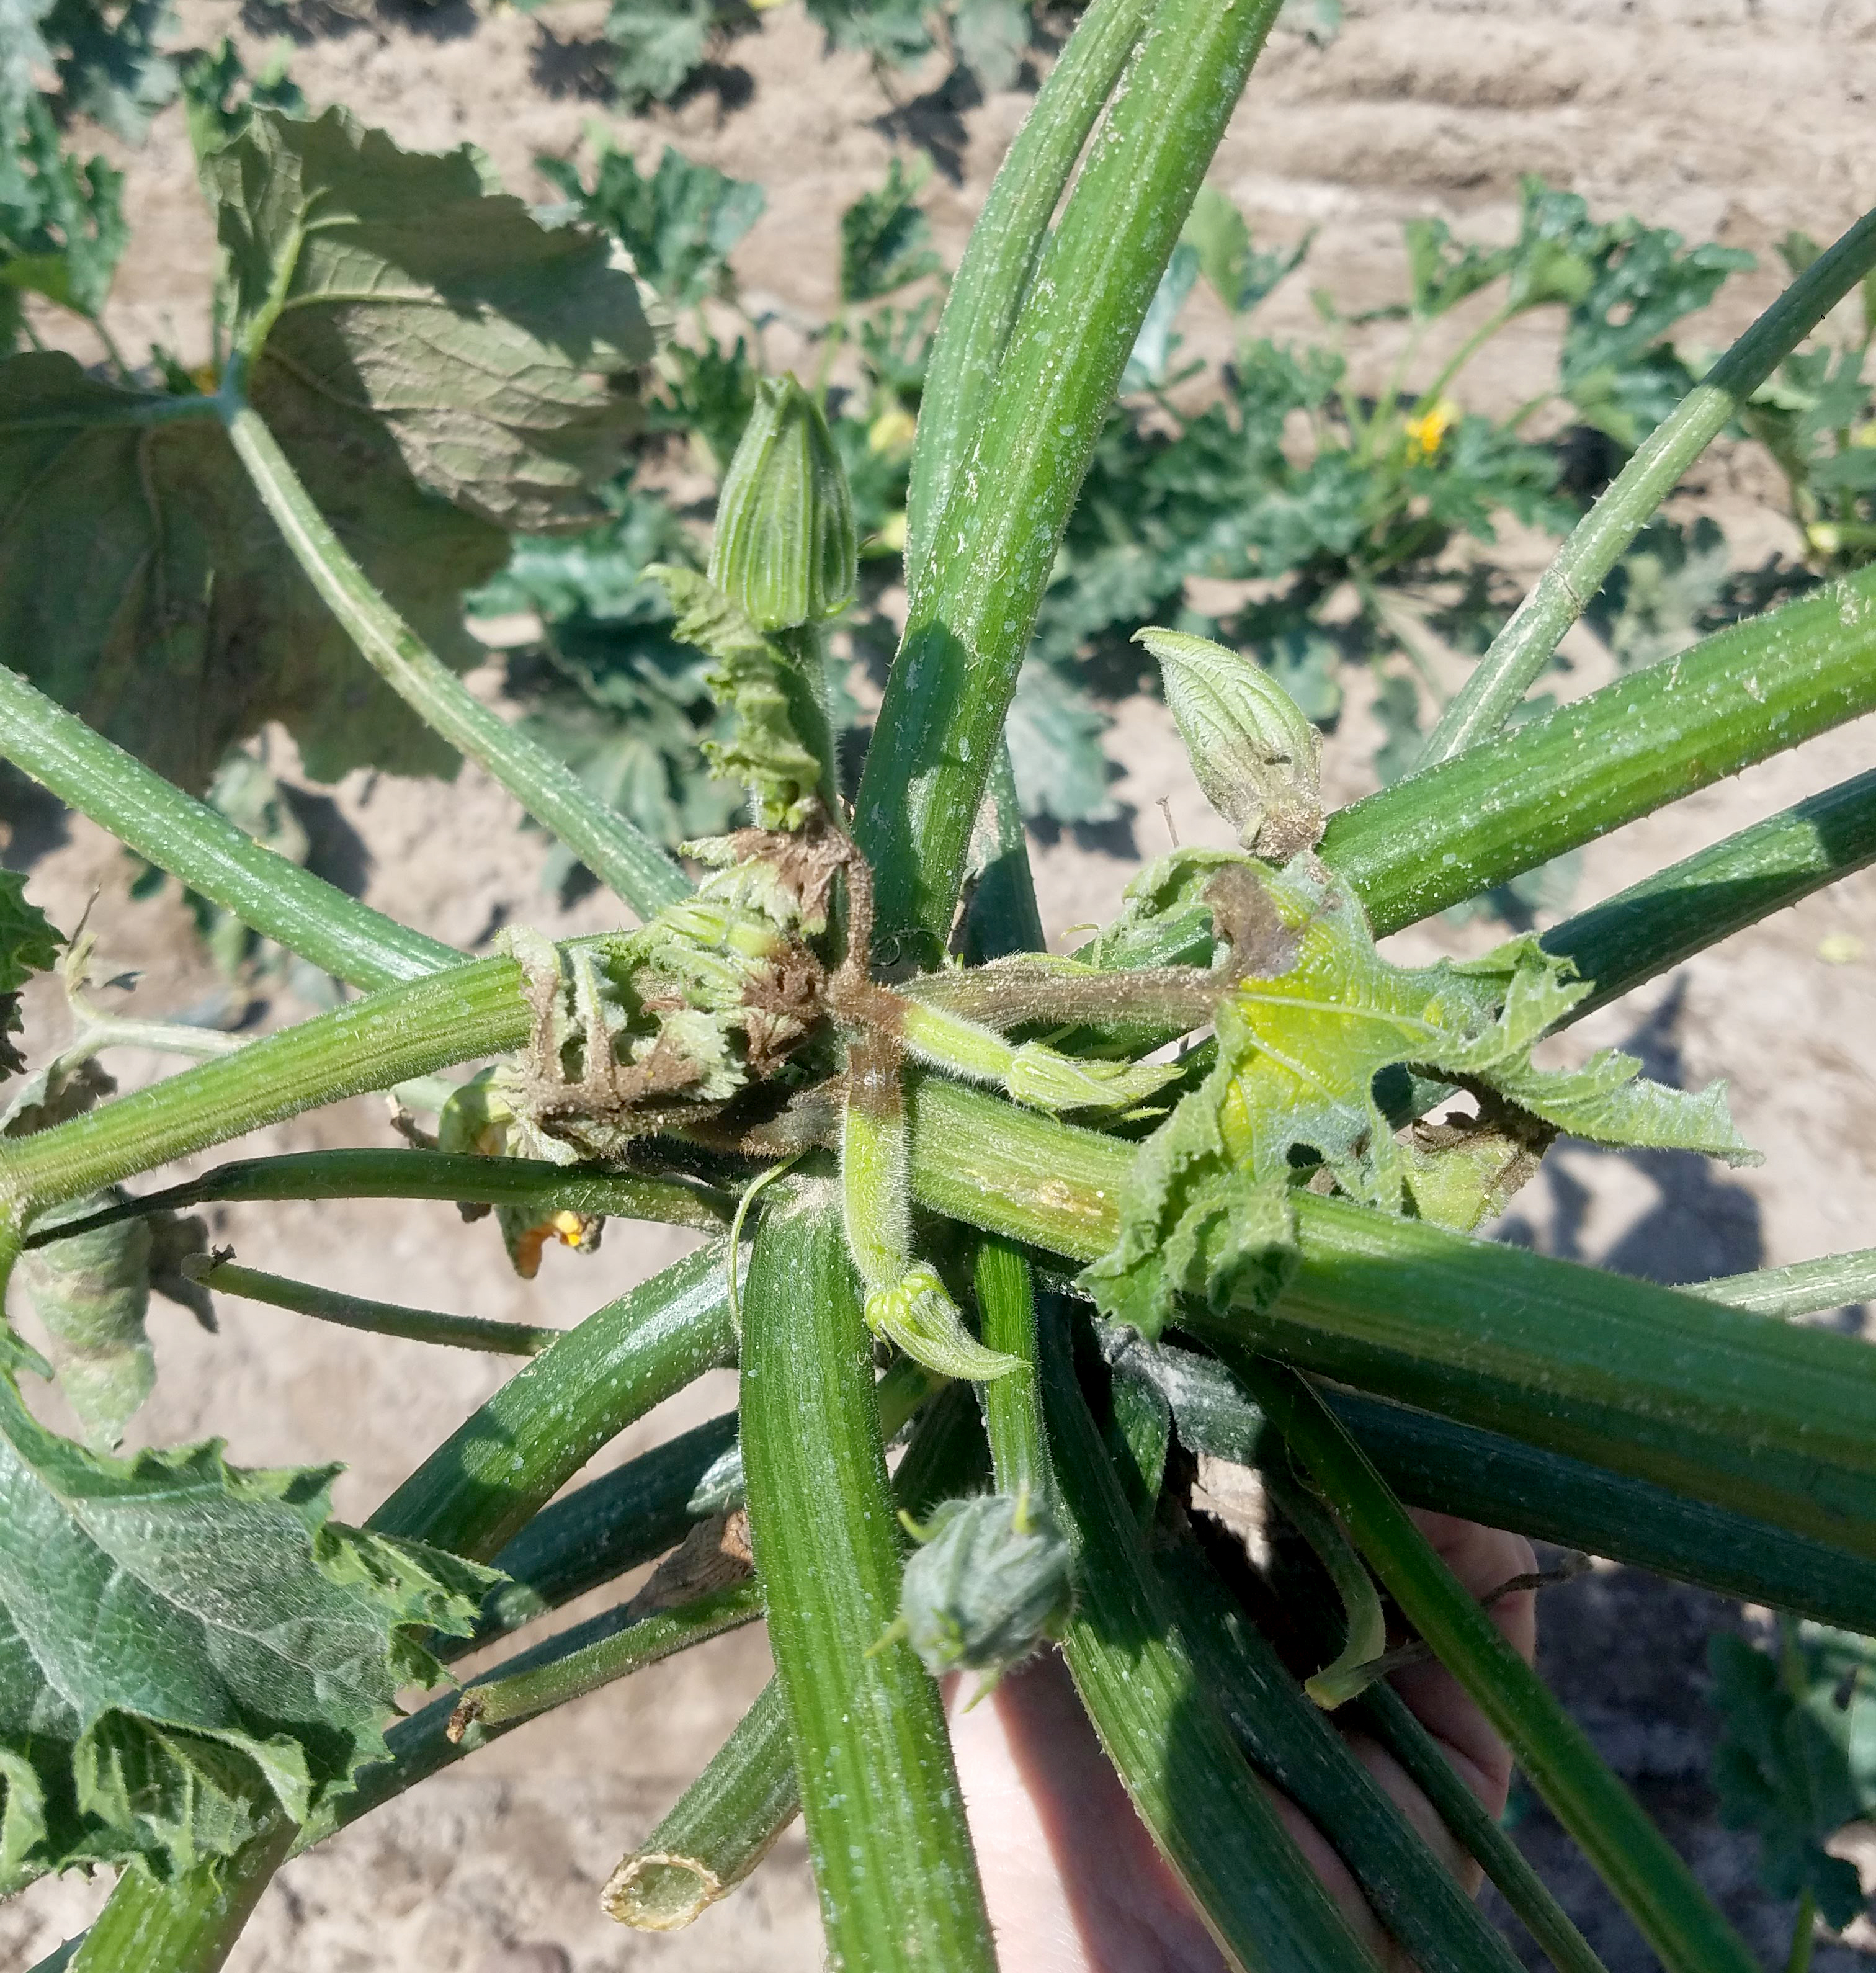 Phytophthora in zucchini